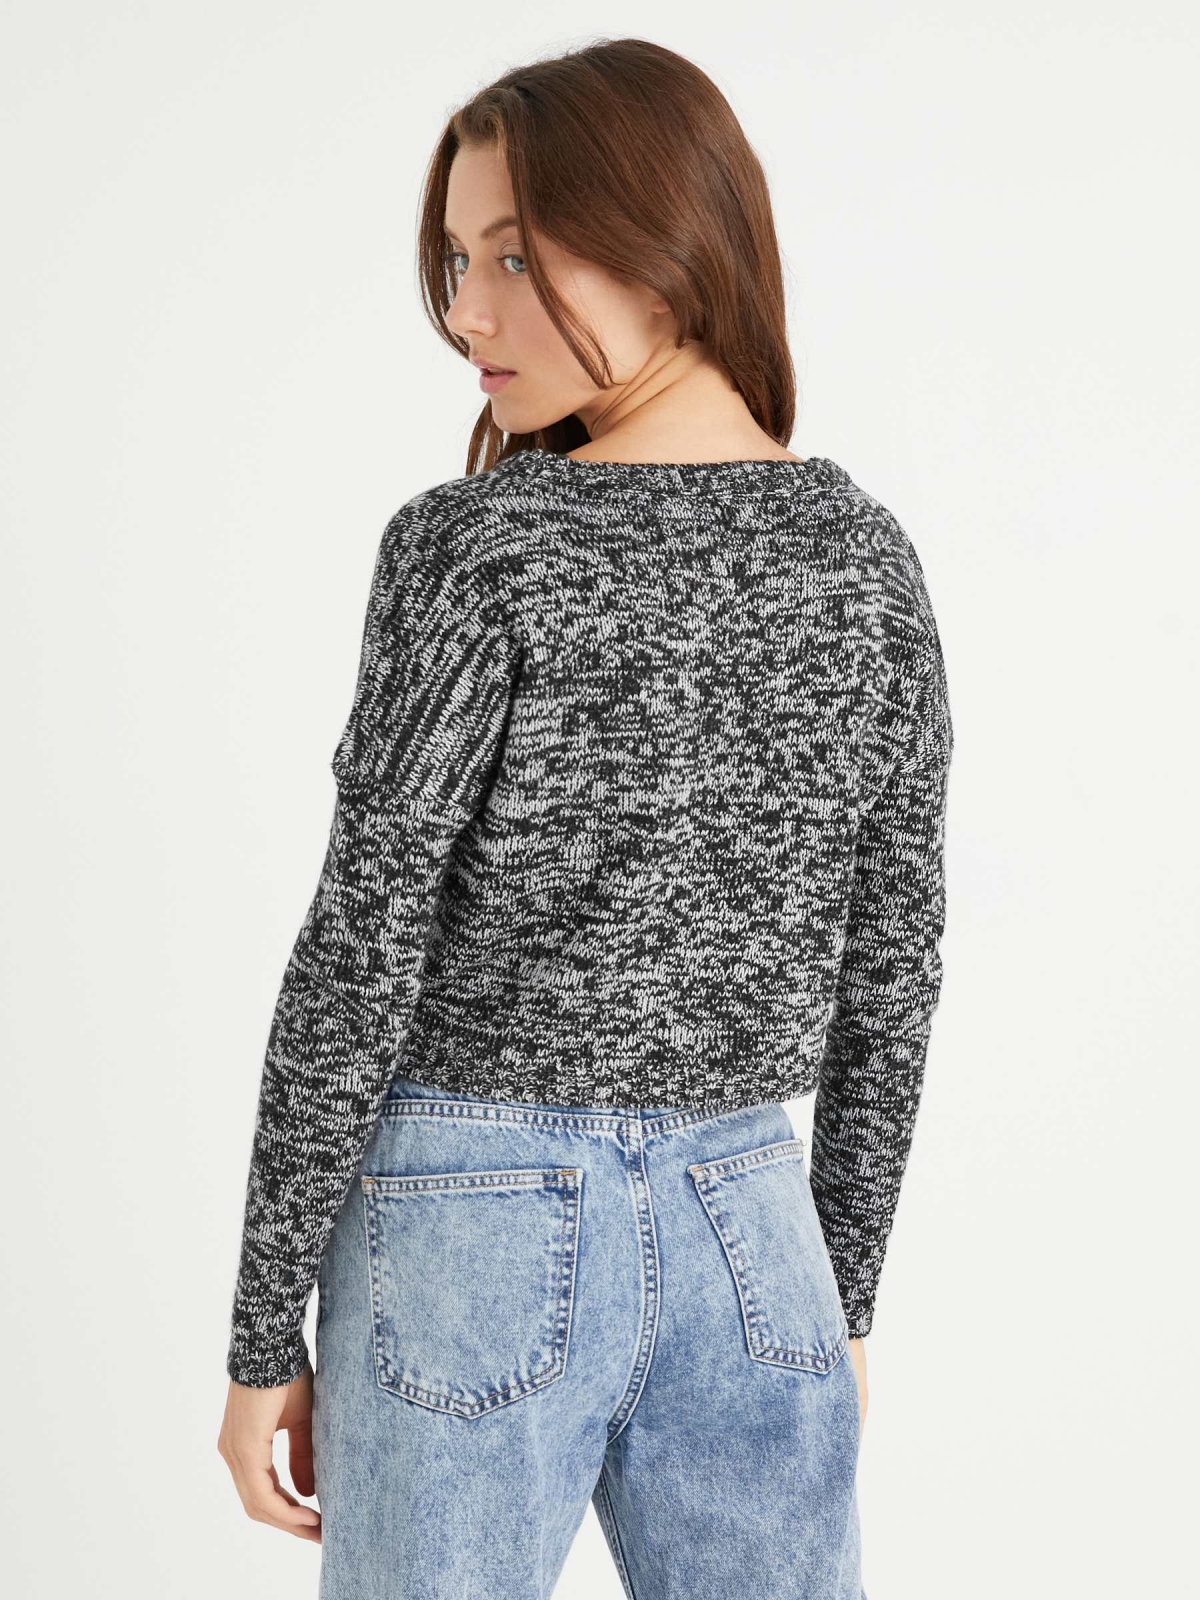 Heather cropped sweater black middle back view